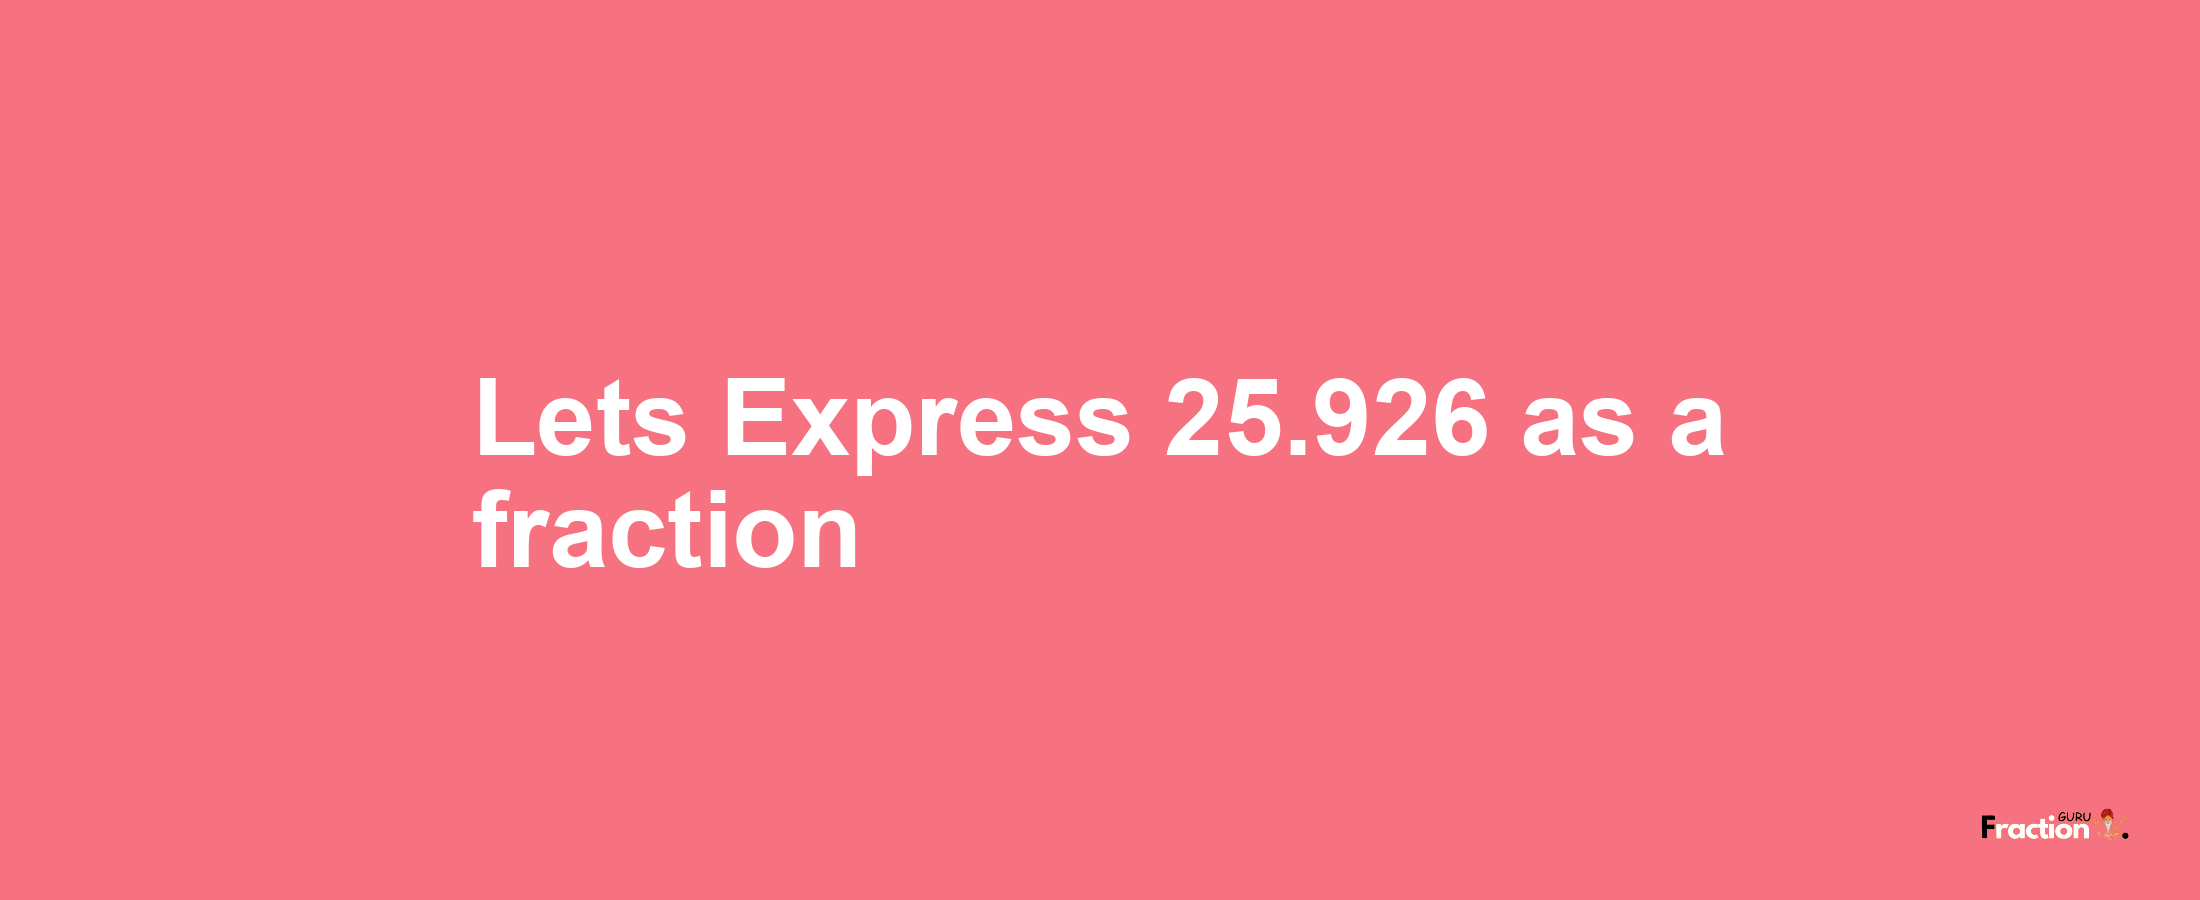 Lets Express 25.926 as afraction